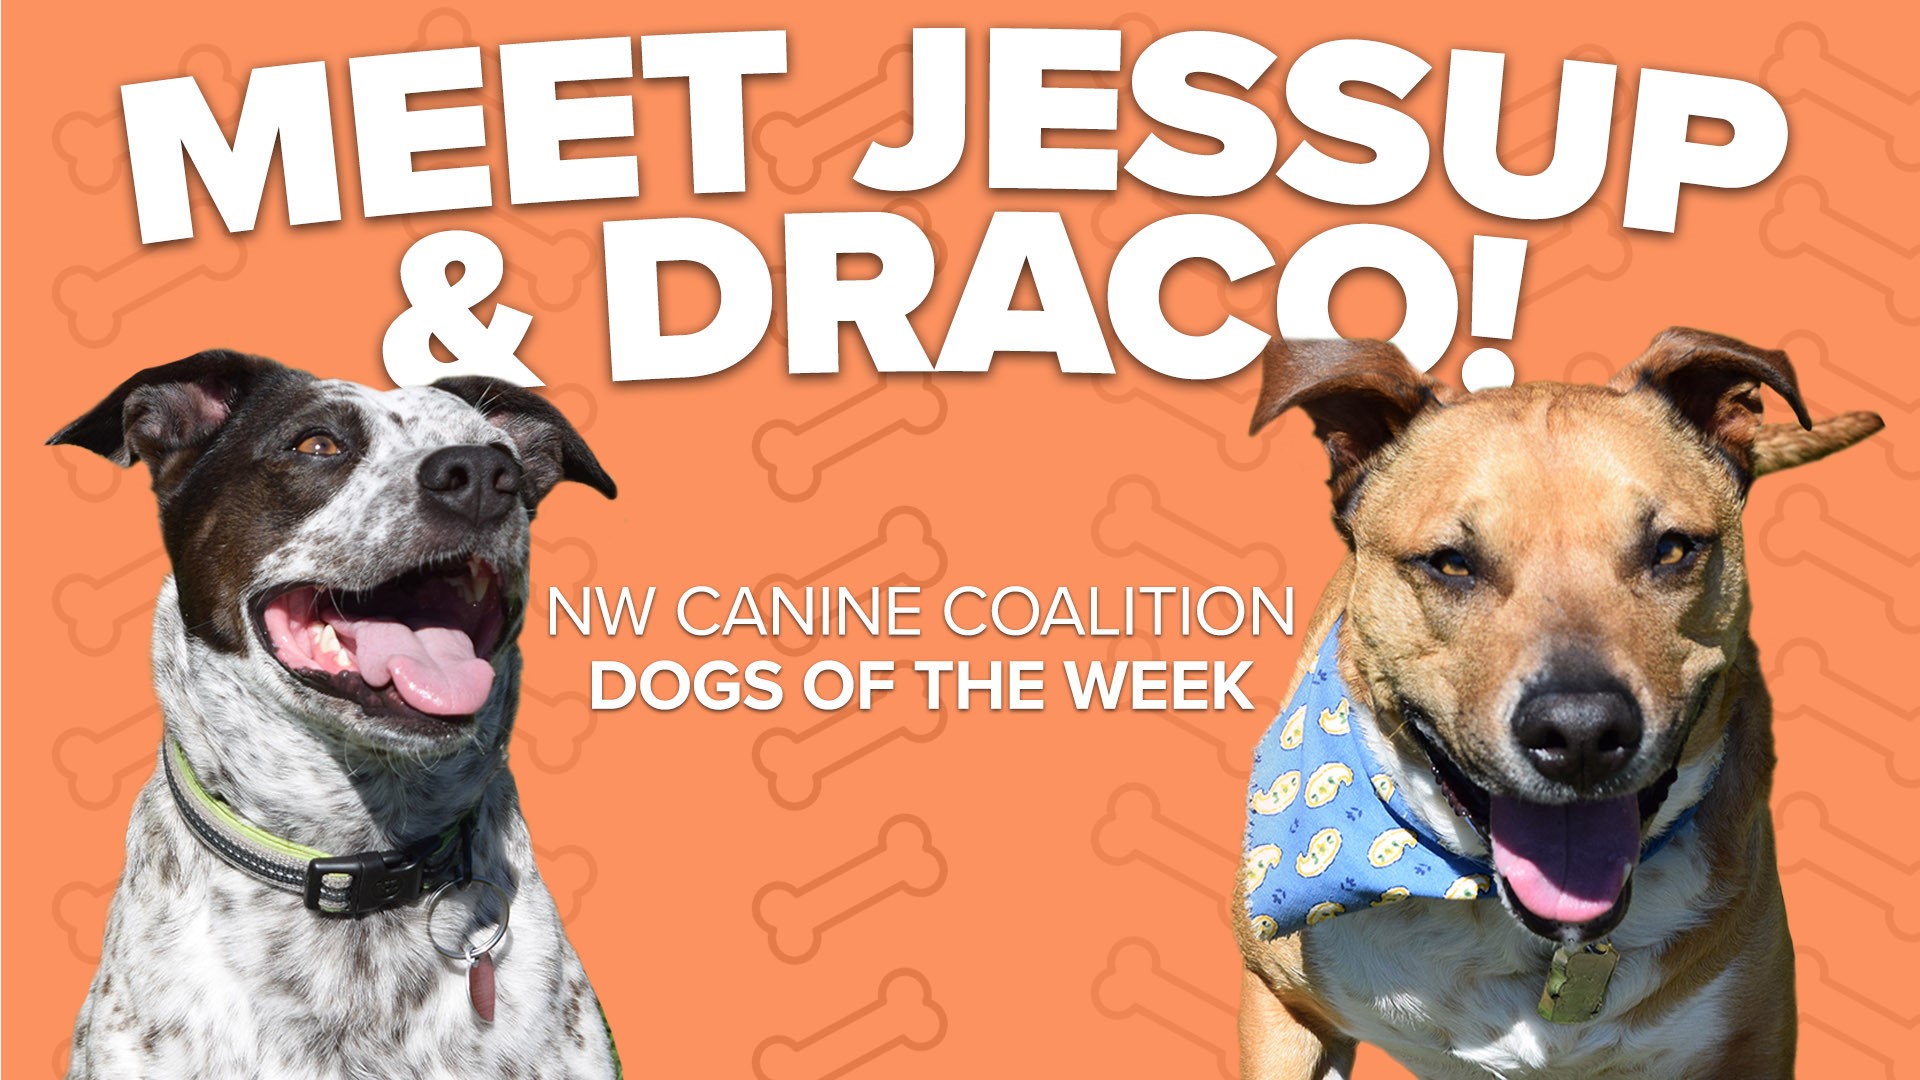 Two loveable dogs are featured this week: 4-year-old Draco and 5-year-old Jessup!